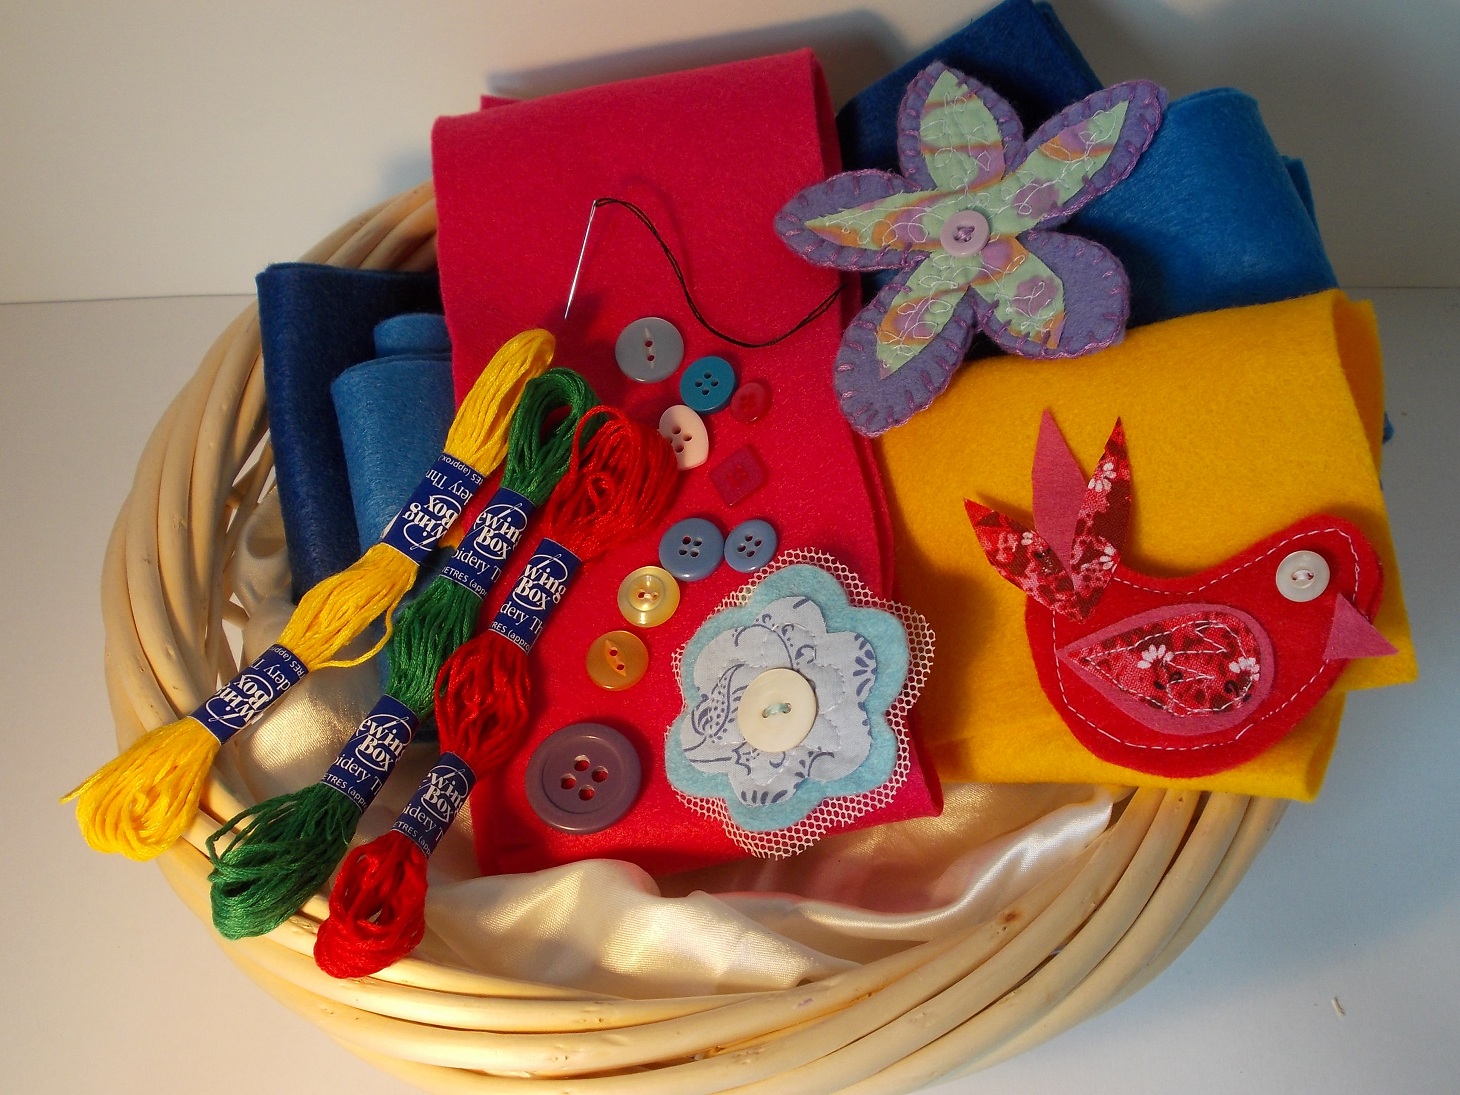 craft class  Up-cycled Uplifters, Felt Brooches or Mosaic Madness and more by Rachel Shilston - Inspiring Creativity